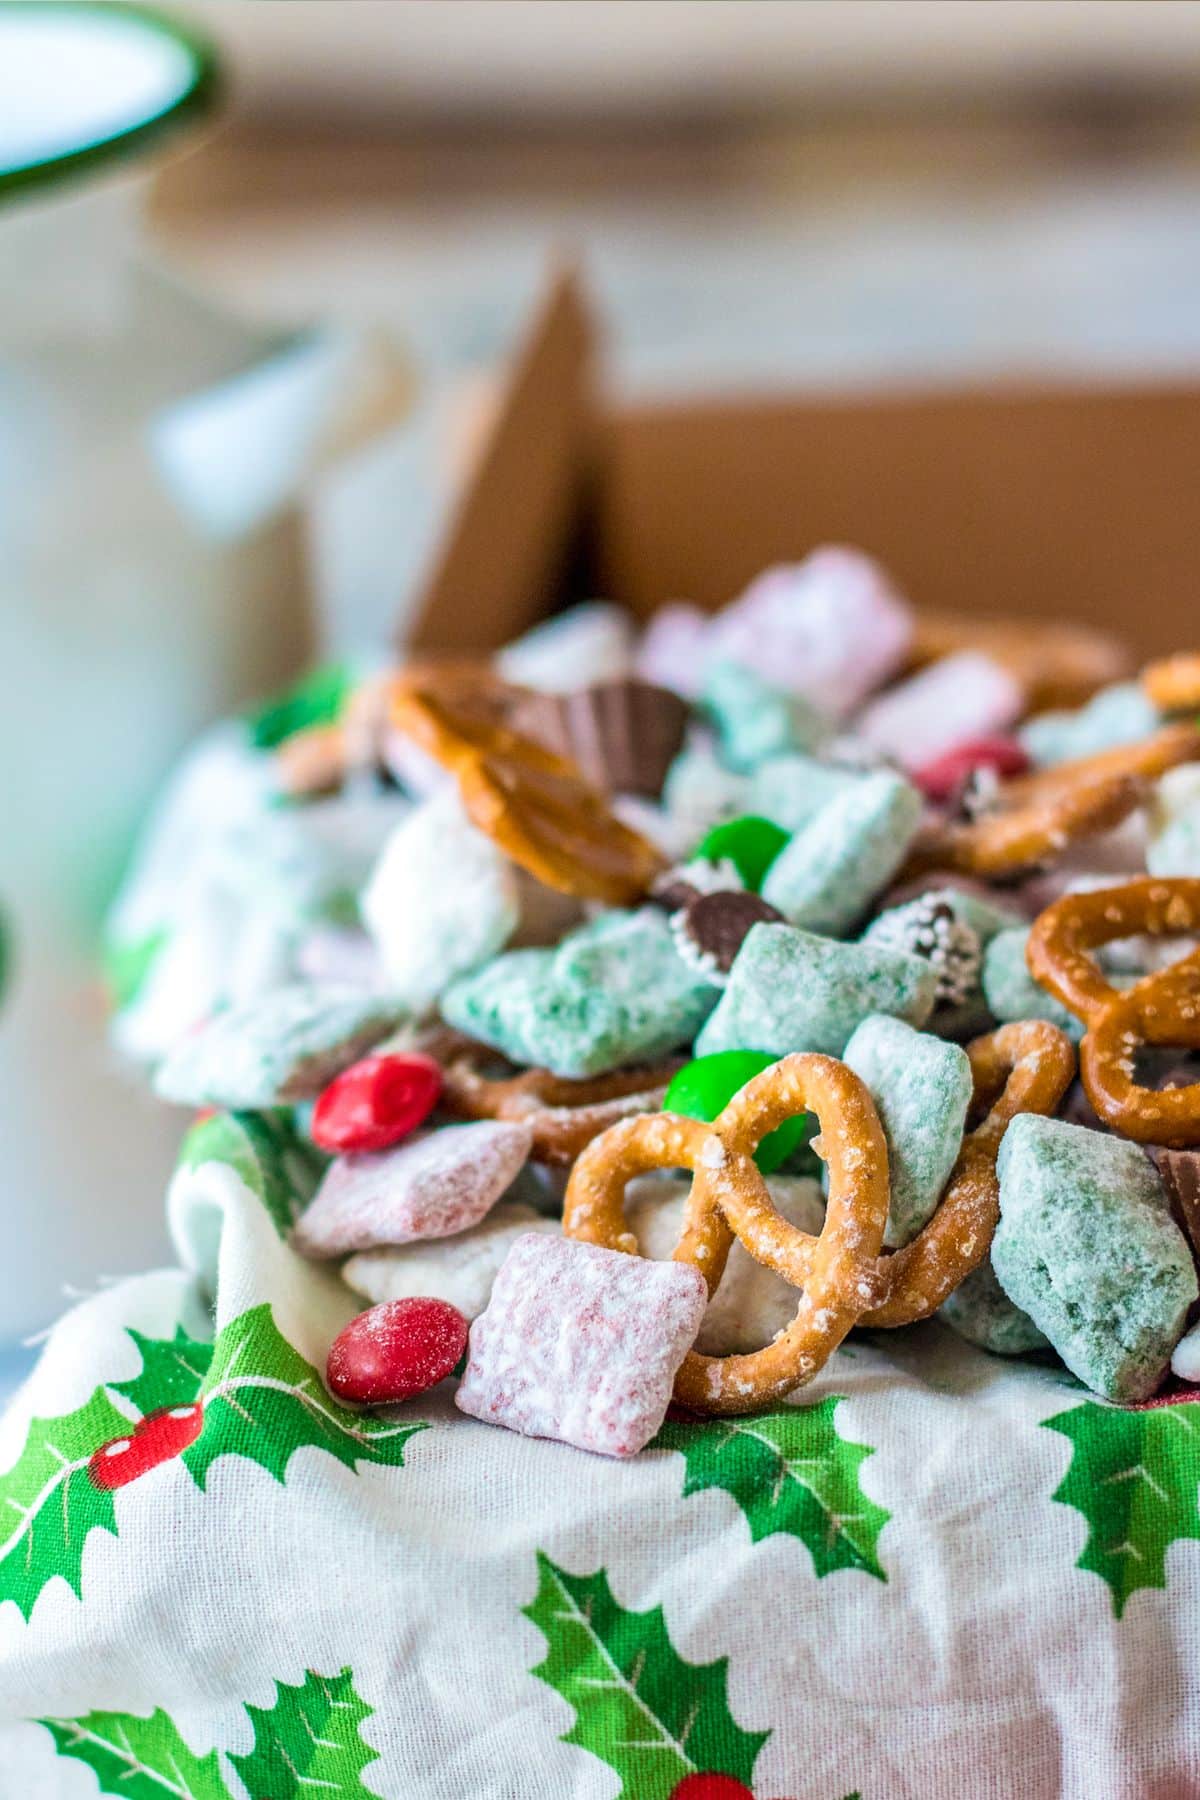 Up close image of Christmas Chocolate Chex Mix served on a Christmas themed cloth.